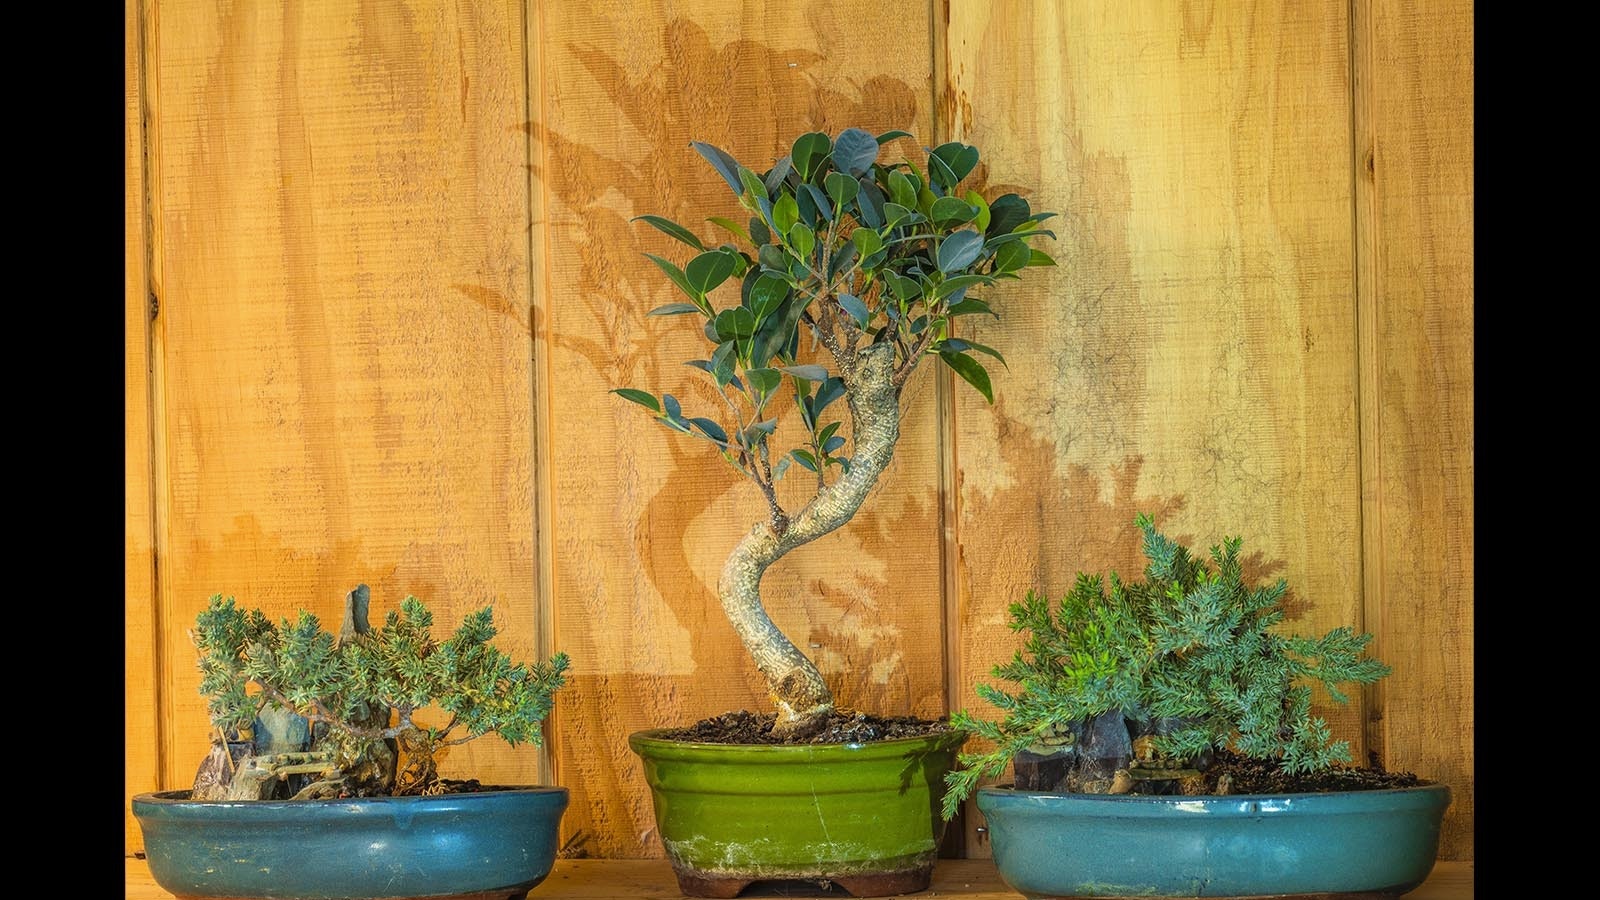 The art of bonsai isn't to create shapes in the trees, it's to find their natural growth paths and augment them.